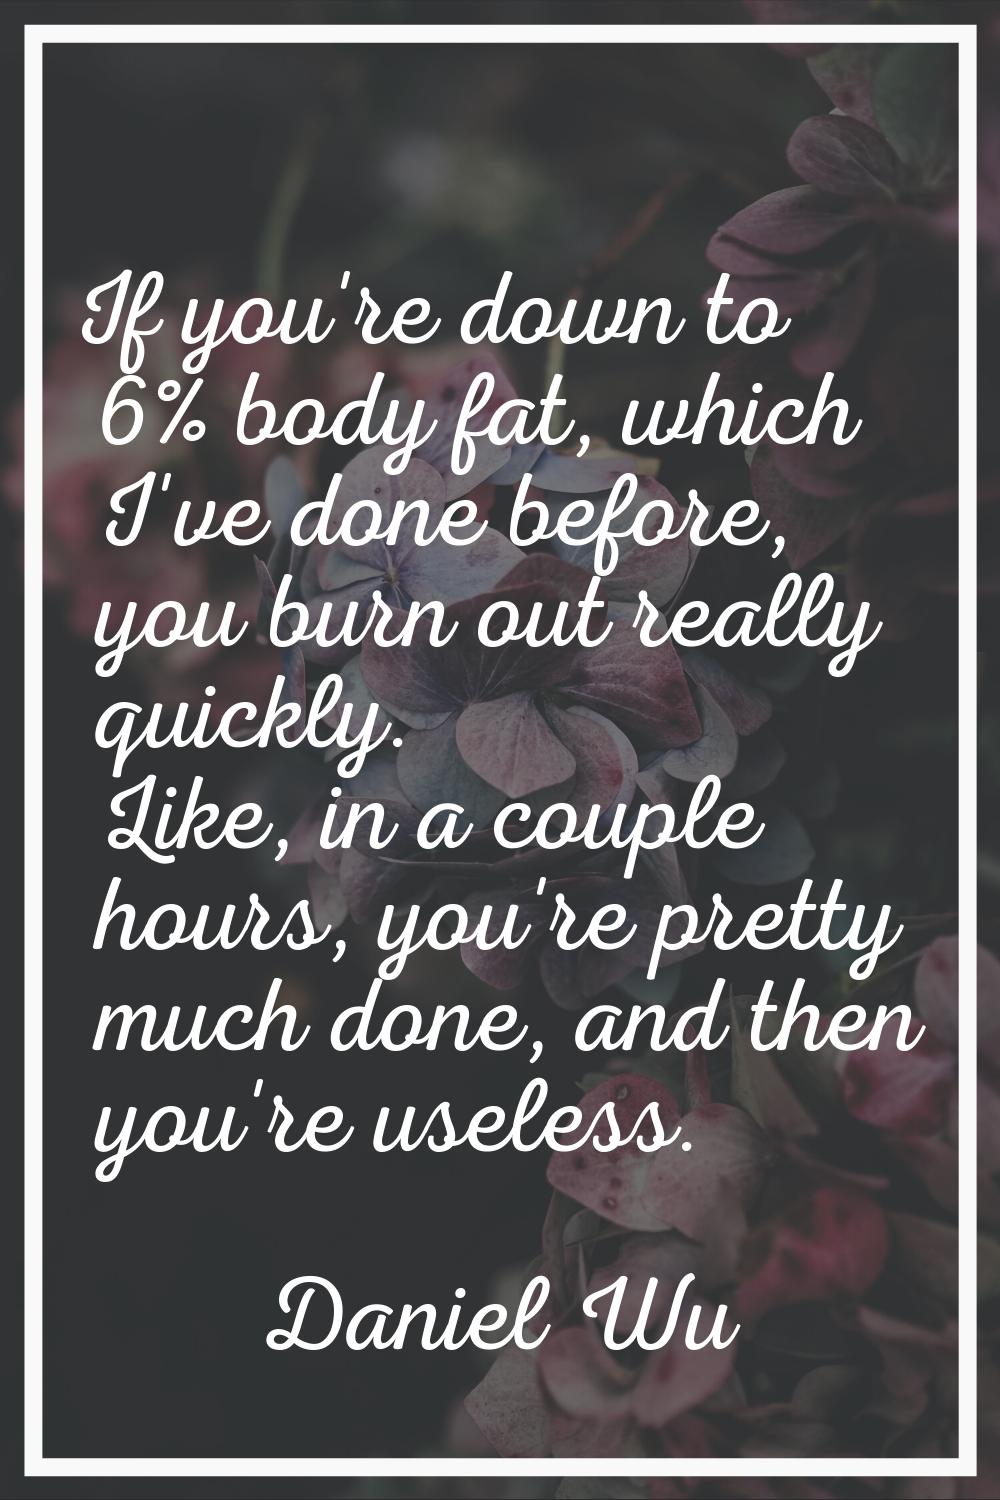 If you're down to 6% body fat, which I've done before, you burn out really quickly. Like, in a coup